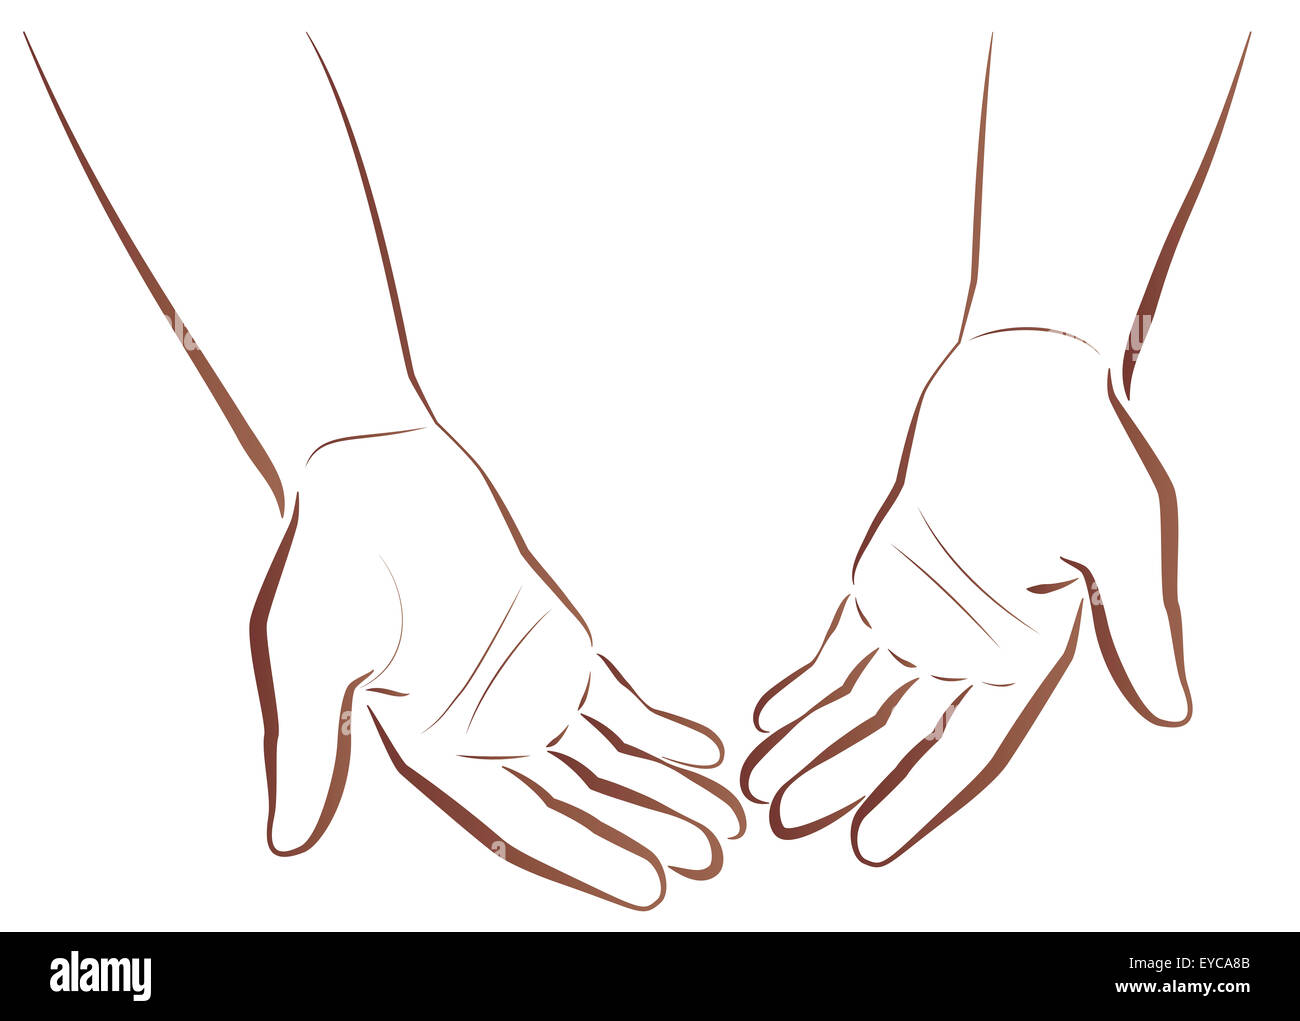 Empty-handed. Two hands of a poor man showing his empty hands. Outline illustration on white background. Stock Photo